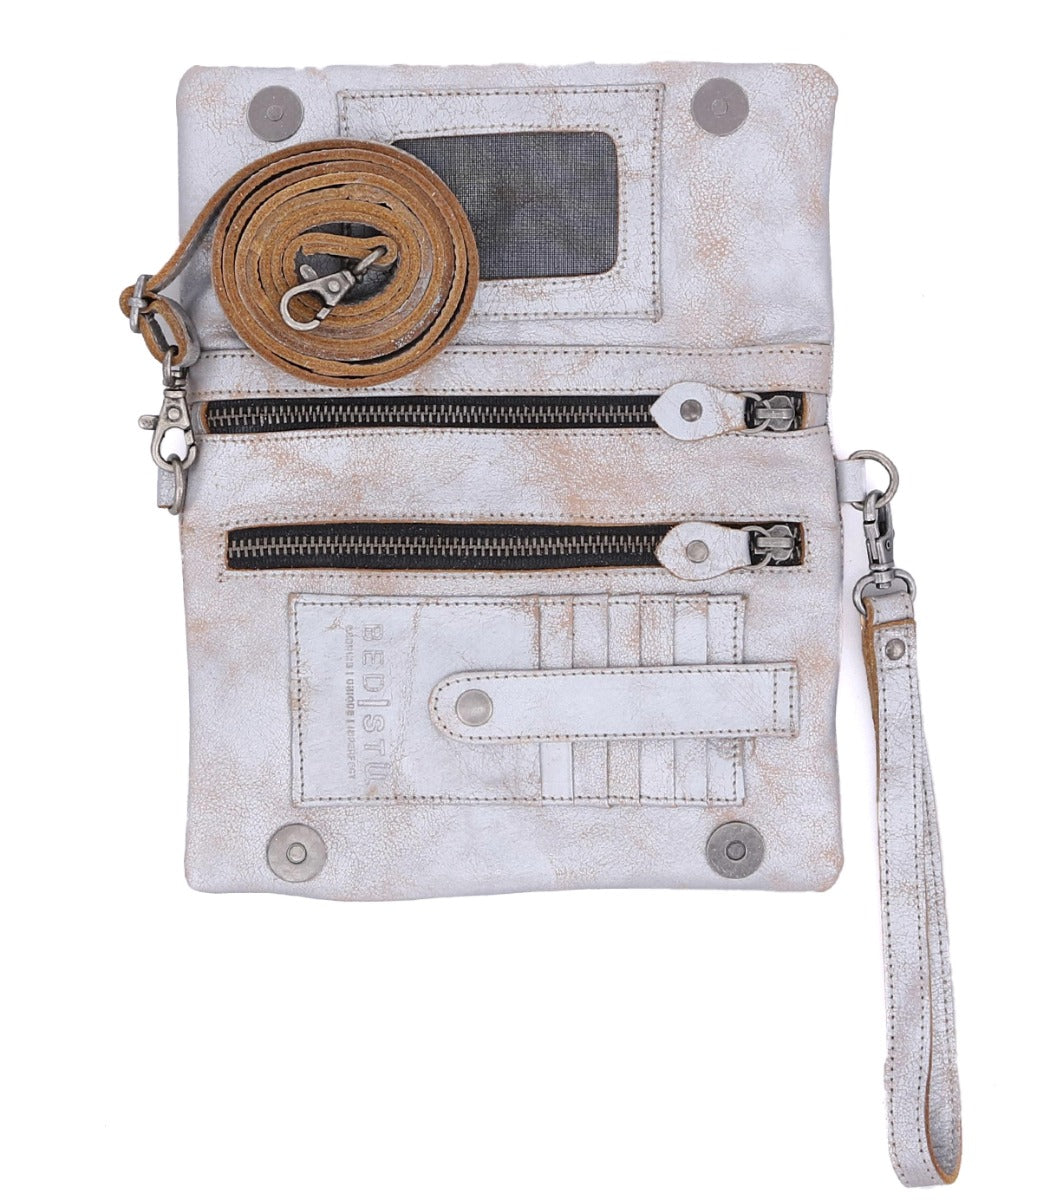 Inside a Cadence silver leather clutch bag by Bed Stu.